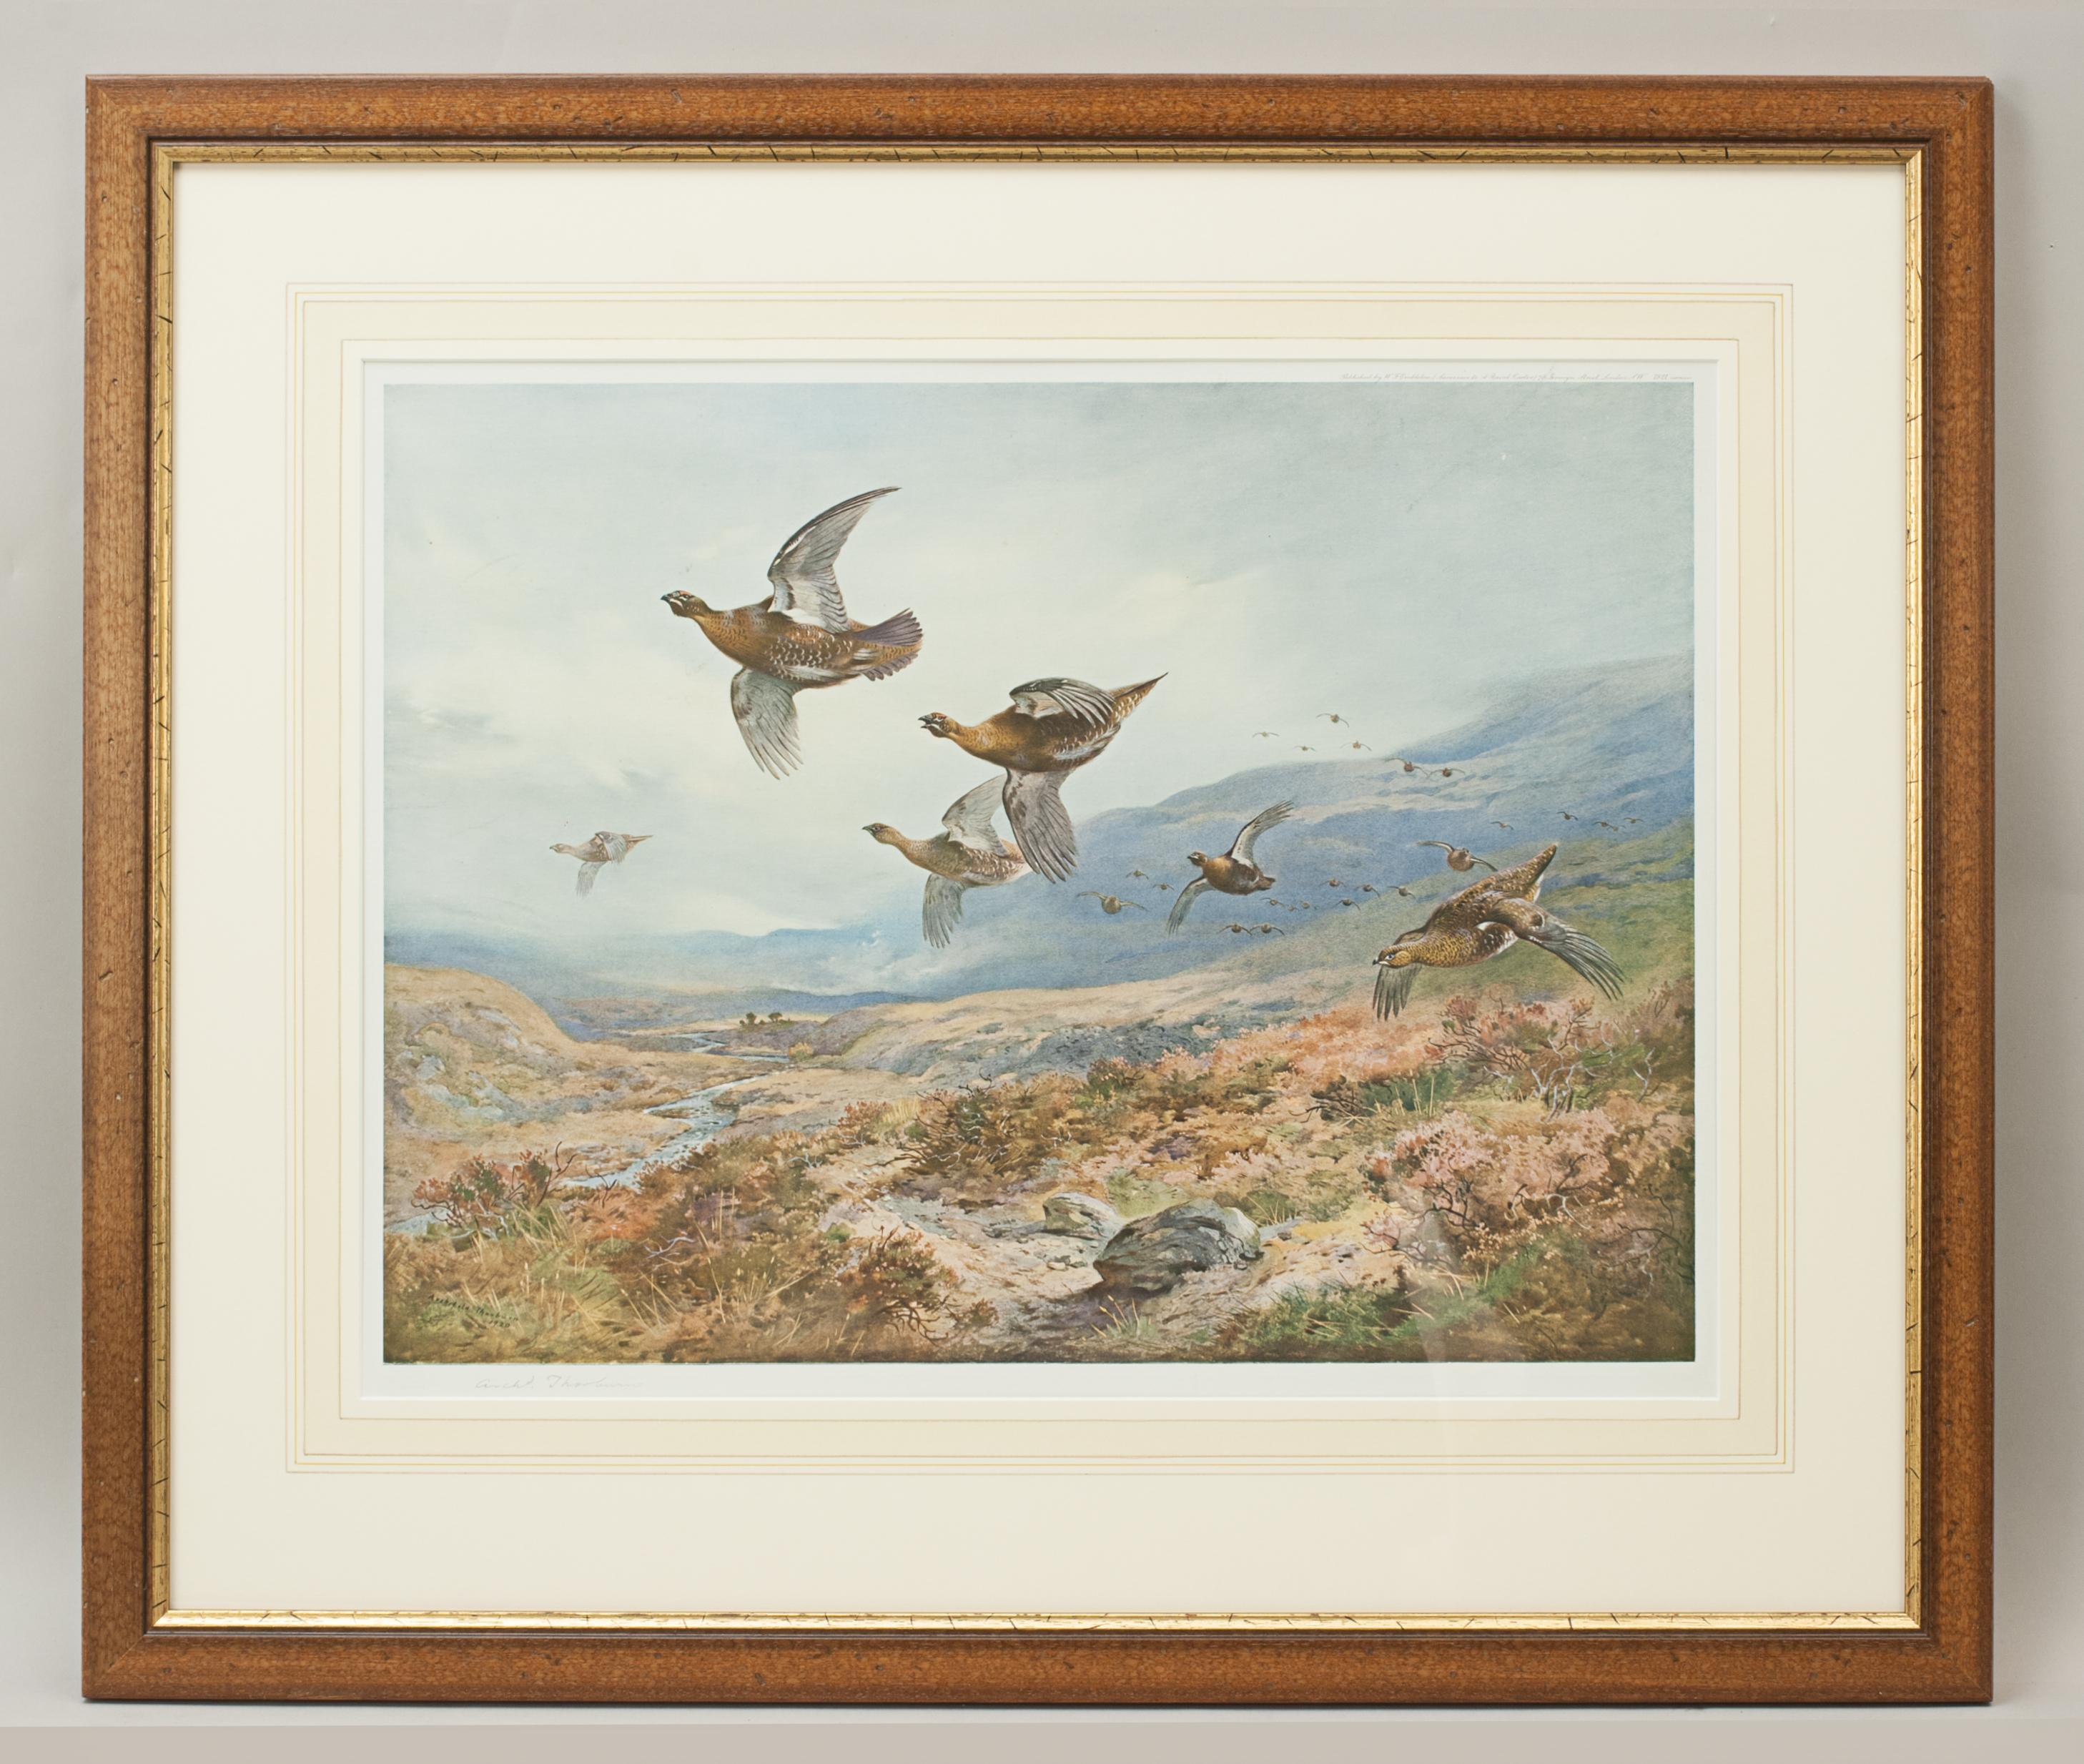 Game birds by Archibald Thorburn.
A framed game bird colotype print by Archibald Thorburn, titled 'Grouse Over The Moors' and signed in pencil by the artist. Published by W.F. Embleton (successor to A. Baird-Carter) 70 Jermyn Street, London, 1921